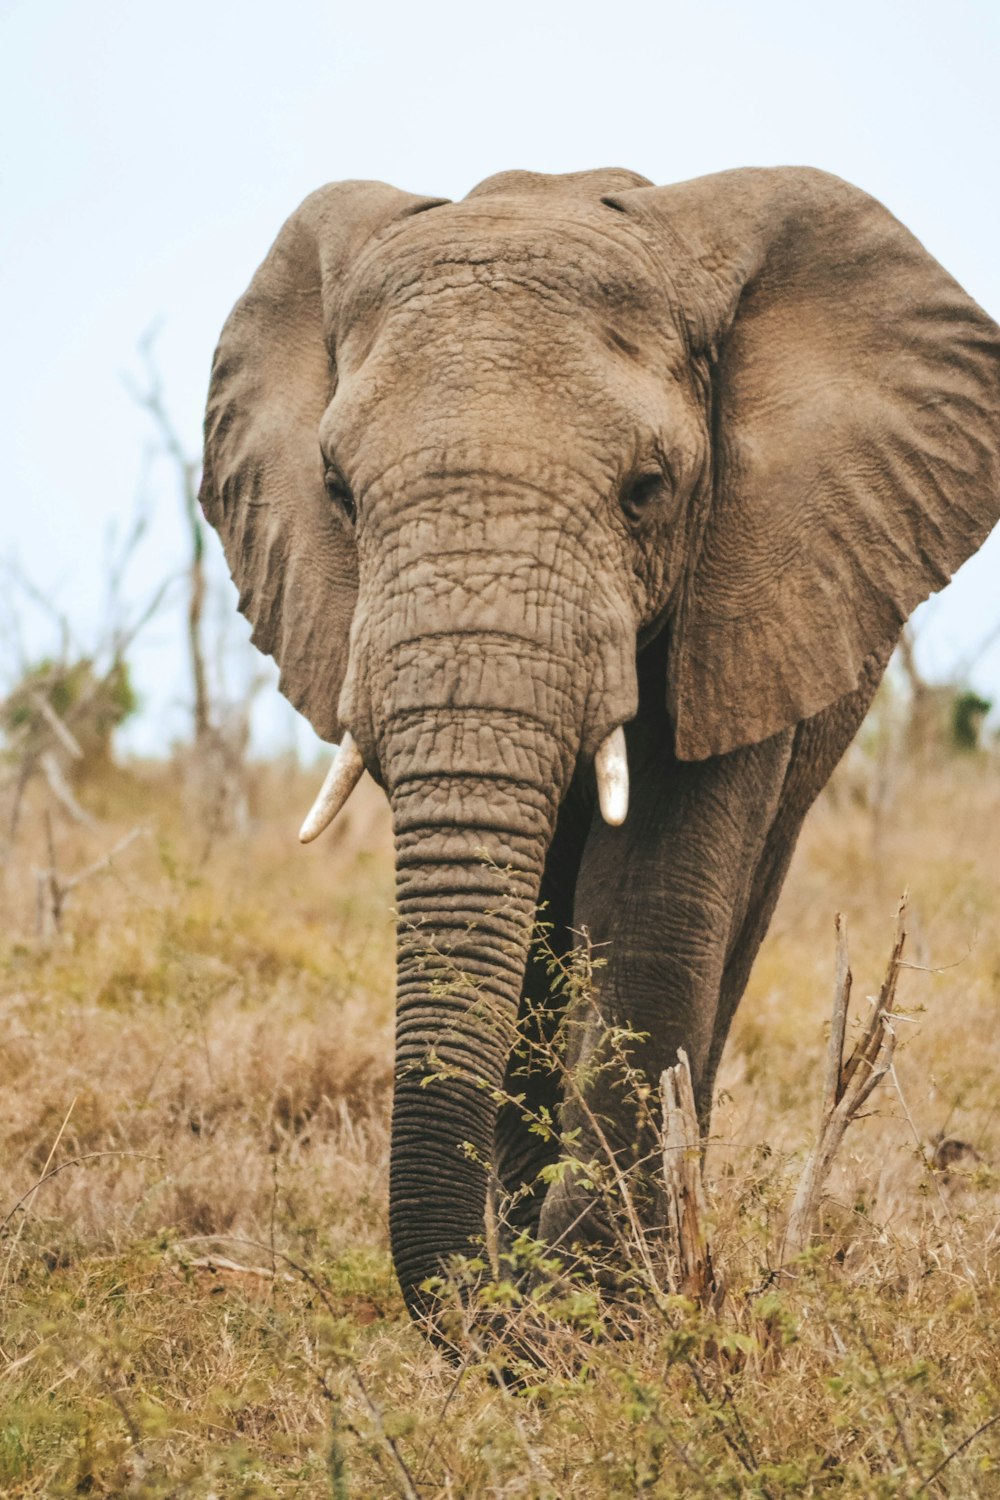 an elephant standing in a grassy field with trees in the background